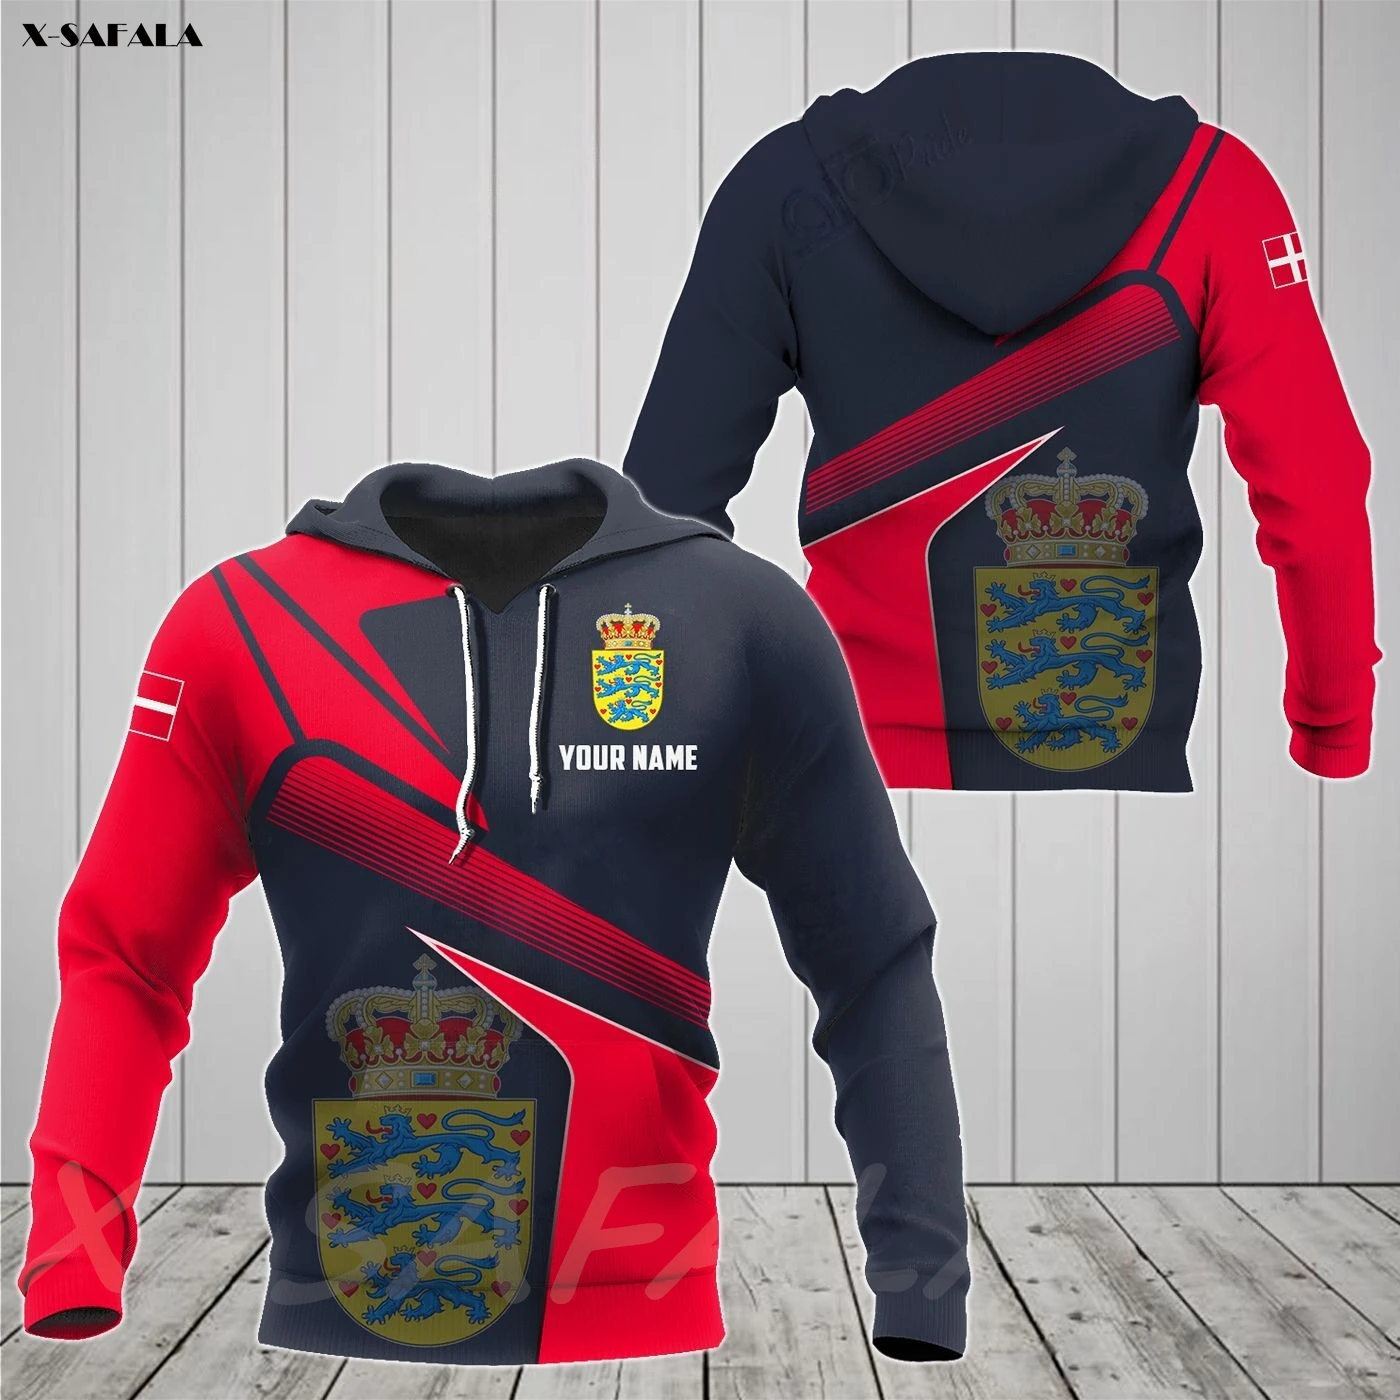 

DENMARK PROUD WITH COAT OF ARMS Country Flag 3D Printed Man Female Zipper HOODIE Pullover Sweatshirt Hooded Jersey Tracksuits